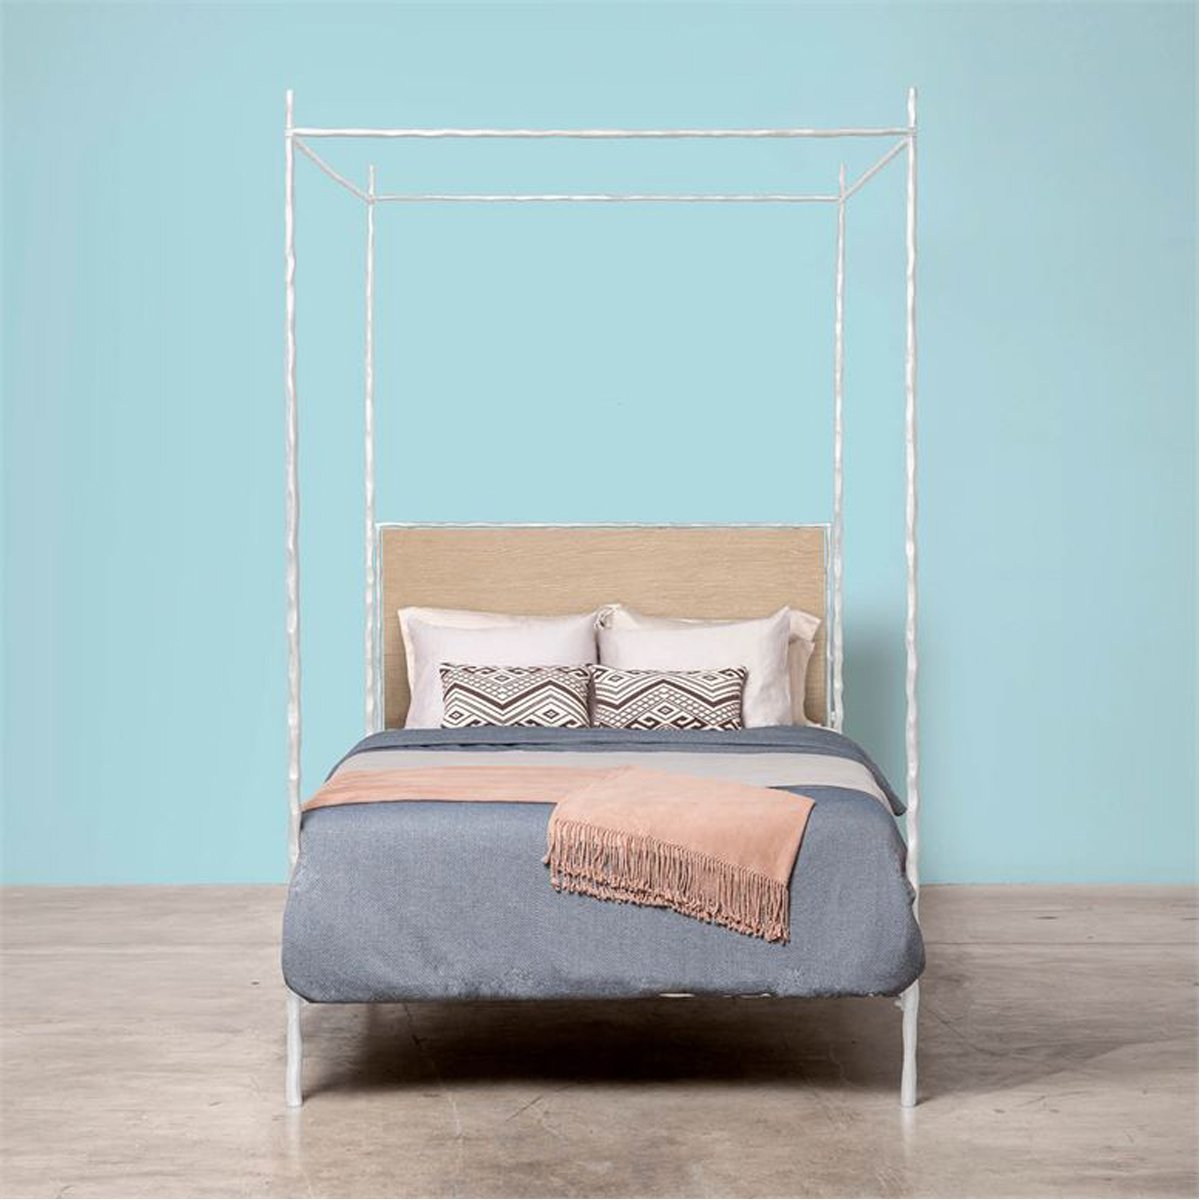 Made Goods Brennan Short Textured Canopy Bed in Garonne Leather